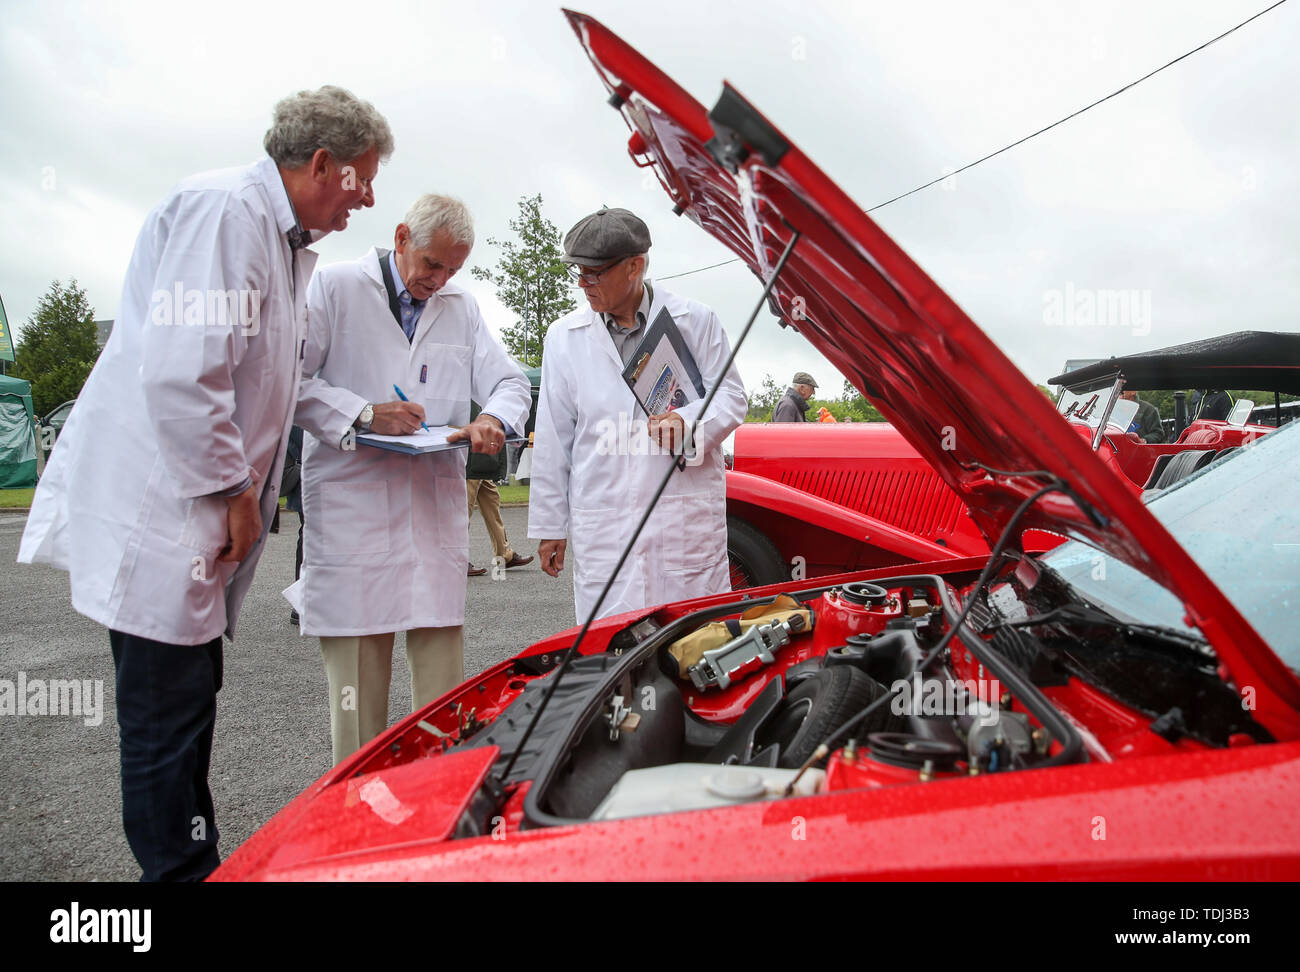 Judges from the VSCC (Vintage Sports Car Club) inspect a 1988 Toyota MR2 Mk1 for the traditional concours d'elegance, during the Brooklands Double Twelve Motorsport Festival at Brooklands Museum, in Weybridge, Surrey. Stock Photo